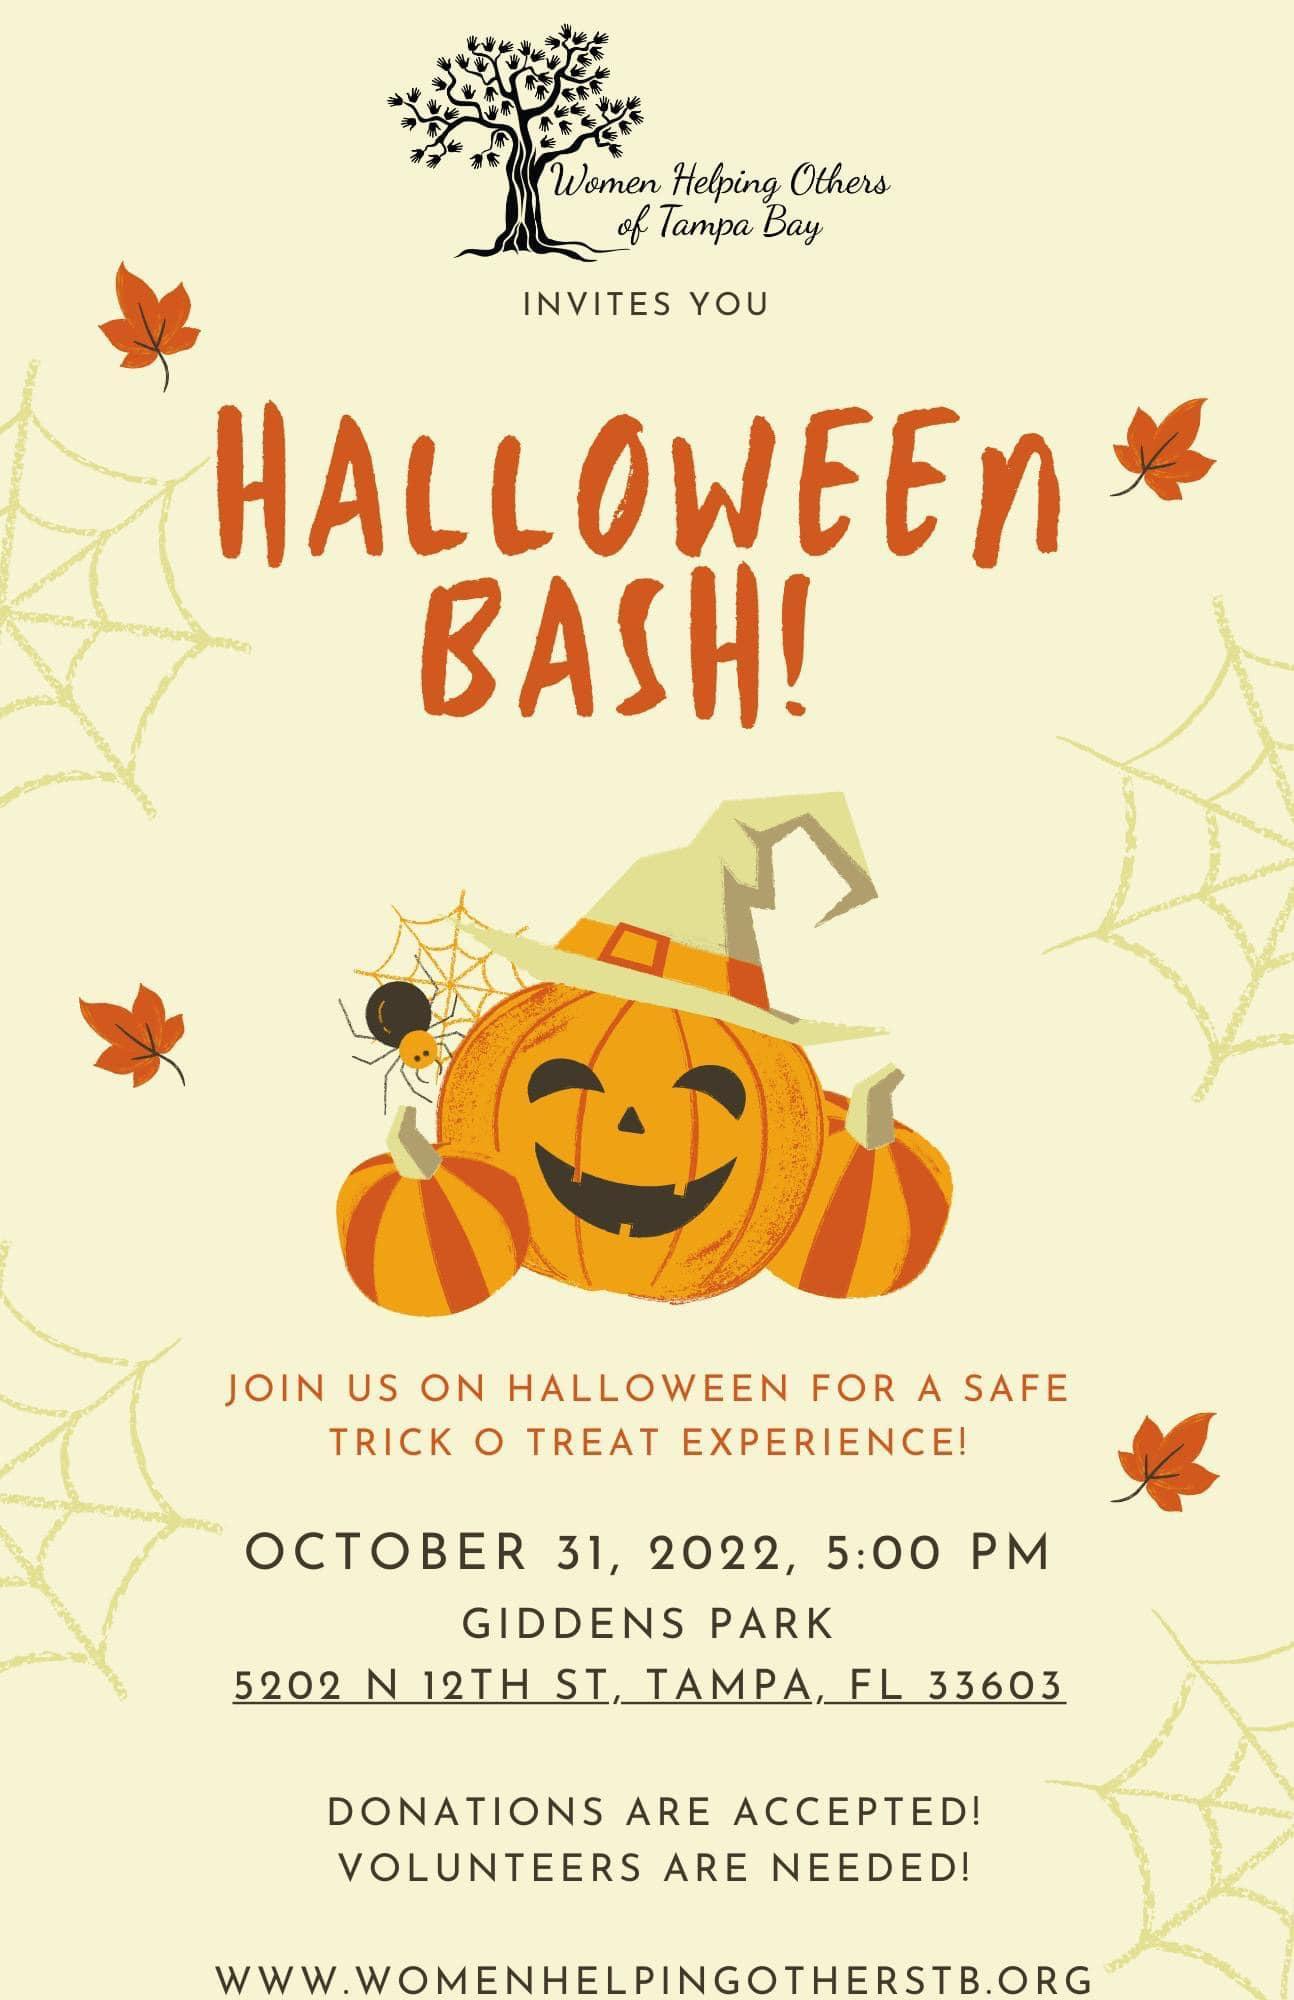 Halloween Bash at Giddens Park
Mon Oct 31, 3:00 PM - Mon Oct 31, 9:00 PM
in 13 days